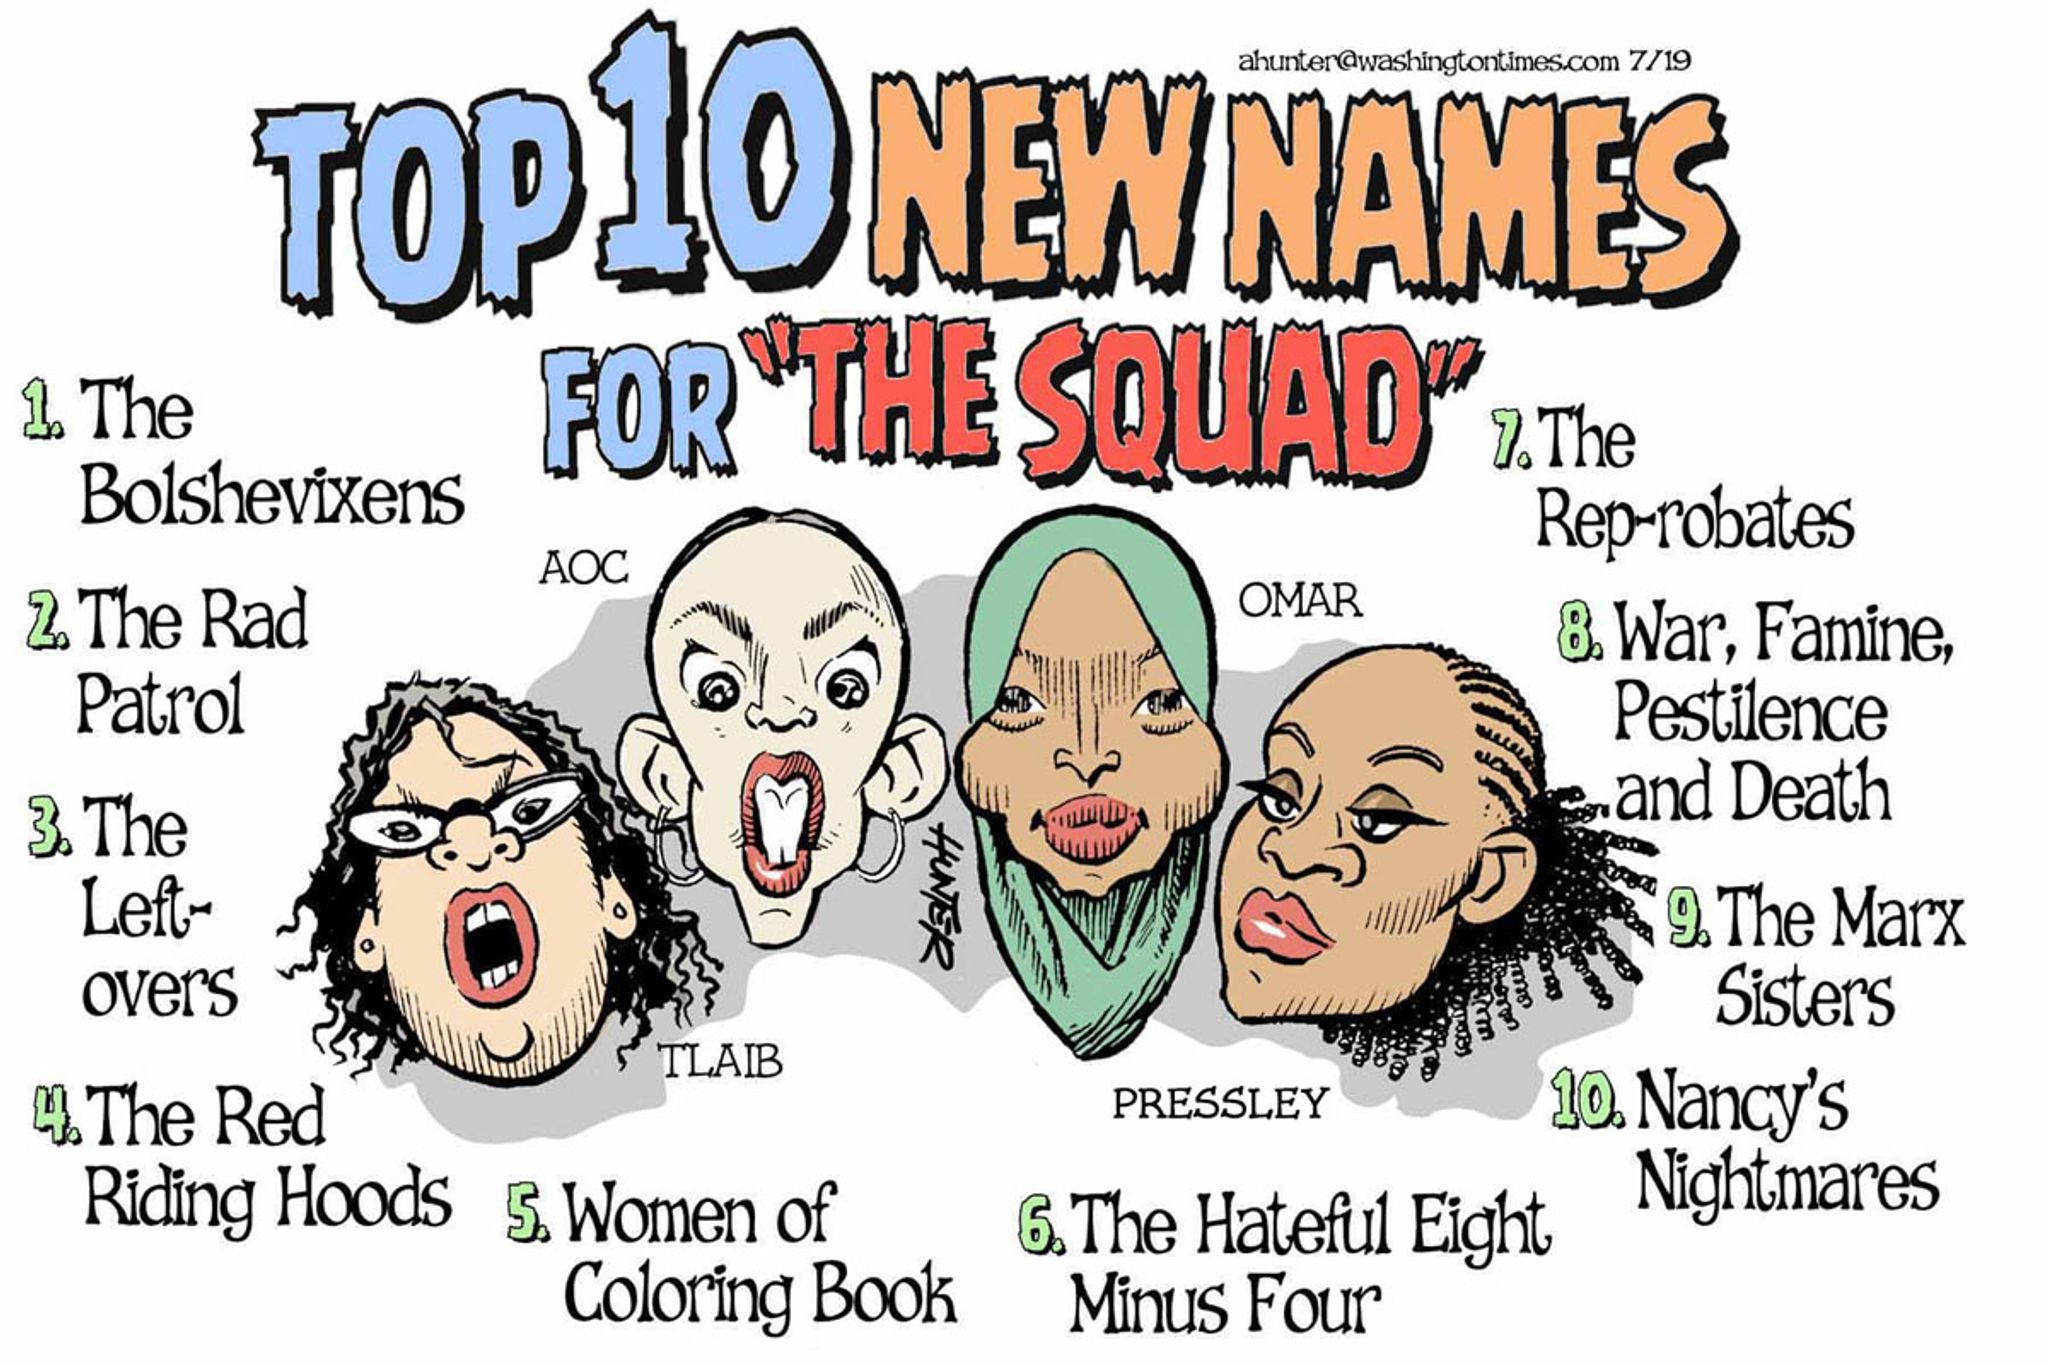 Political Cartoons - Congress in action - Top 10 New Names for 